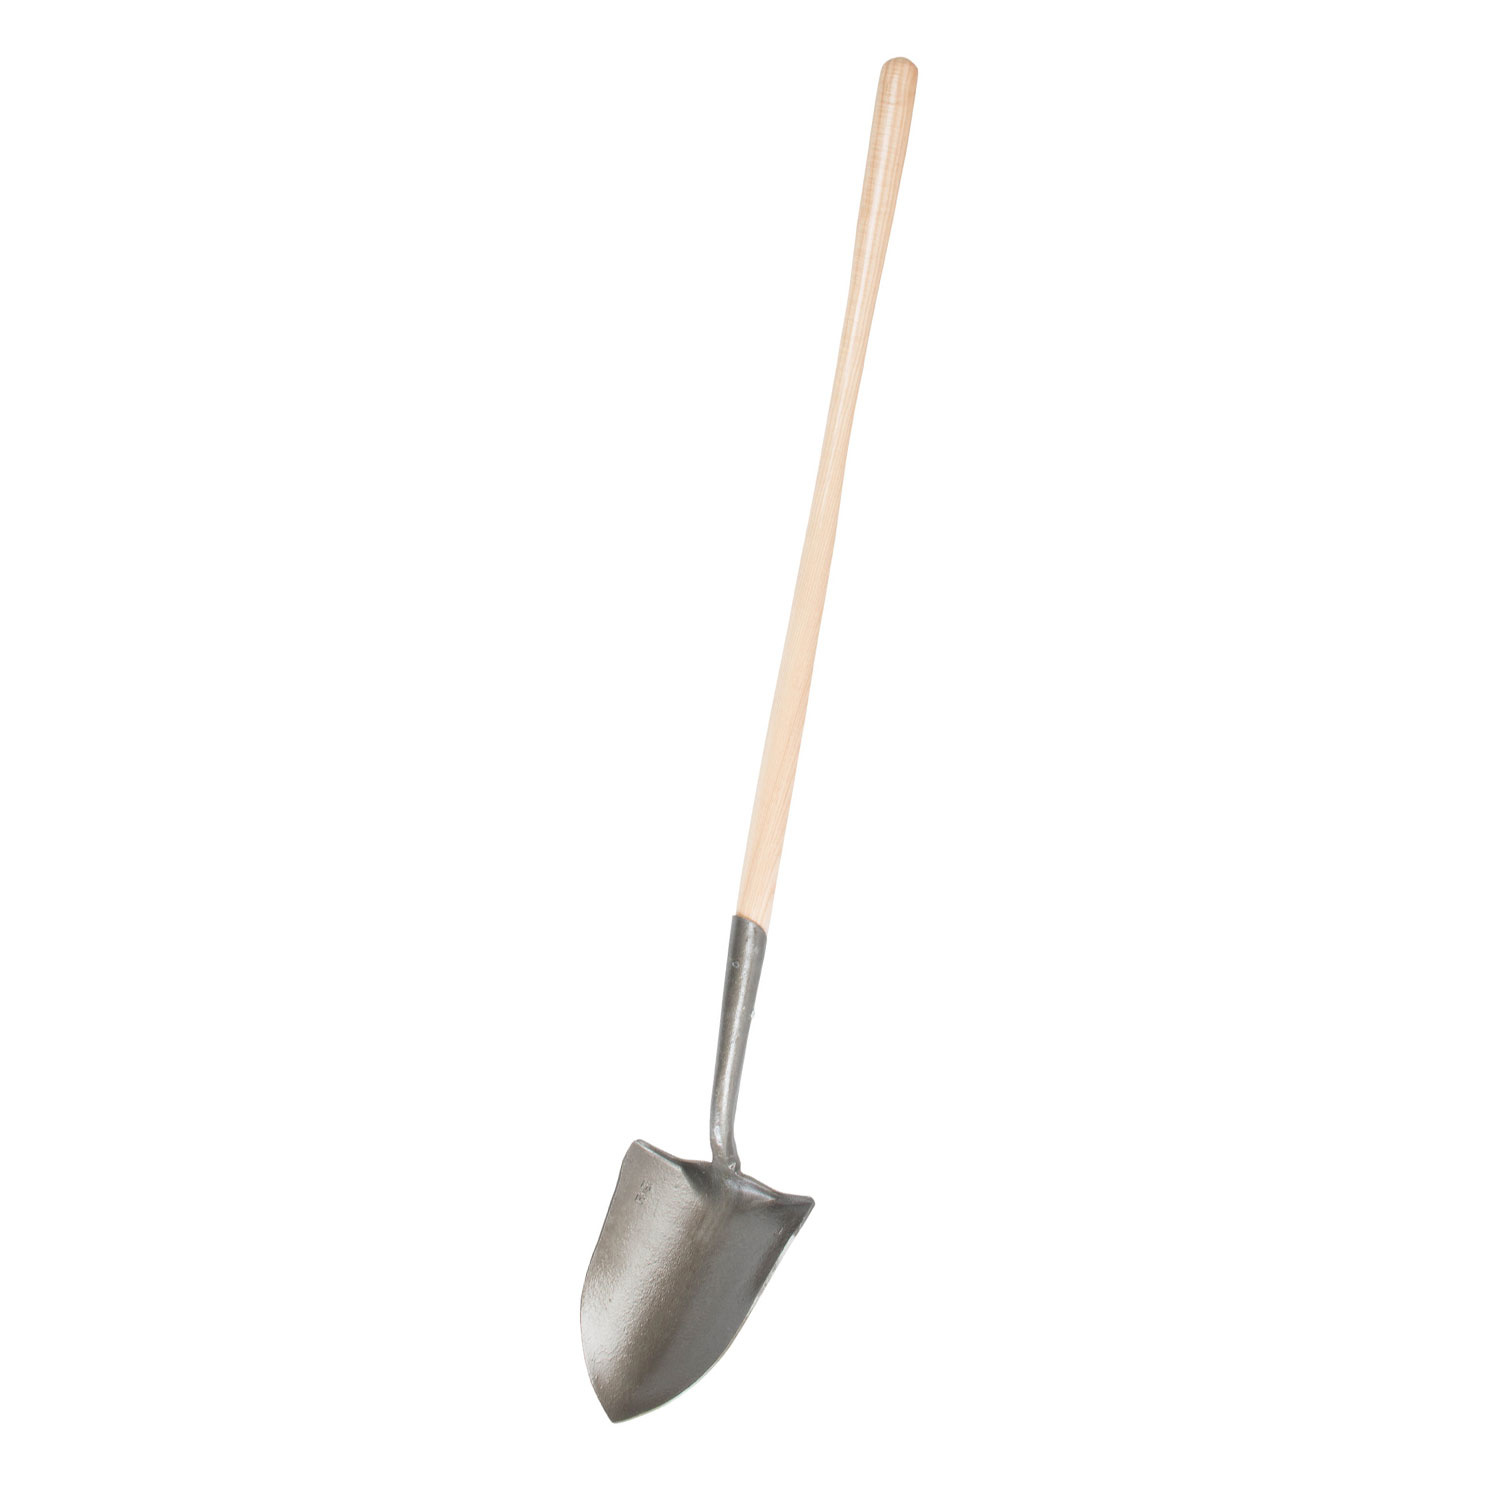 L COUNCIL TOOL FFSHOSS38 FSS Fire Shovel,Straight Handle,42 In 